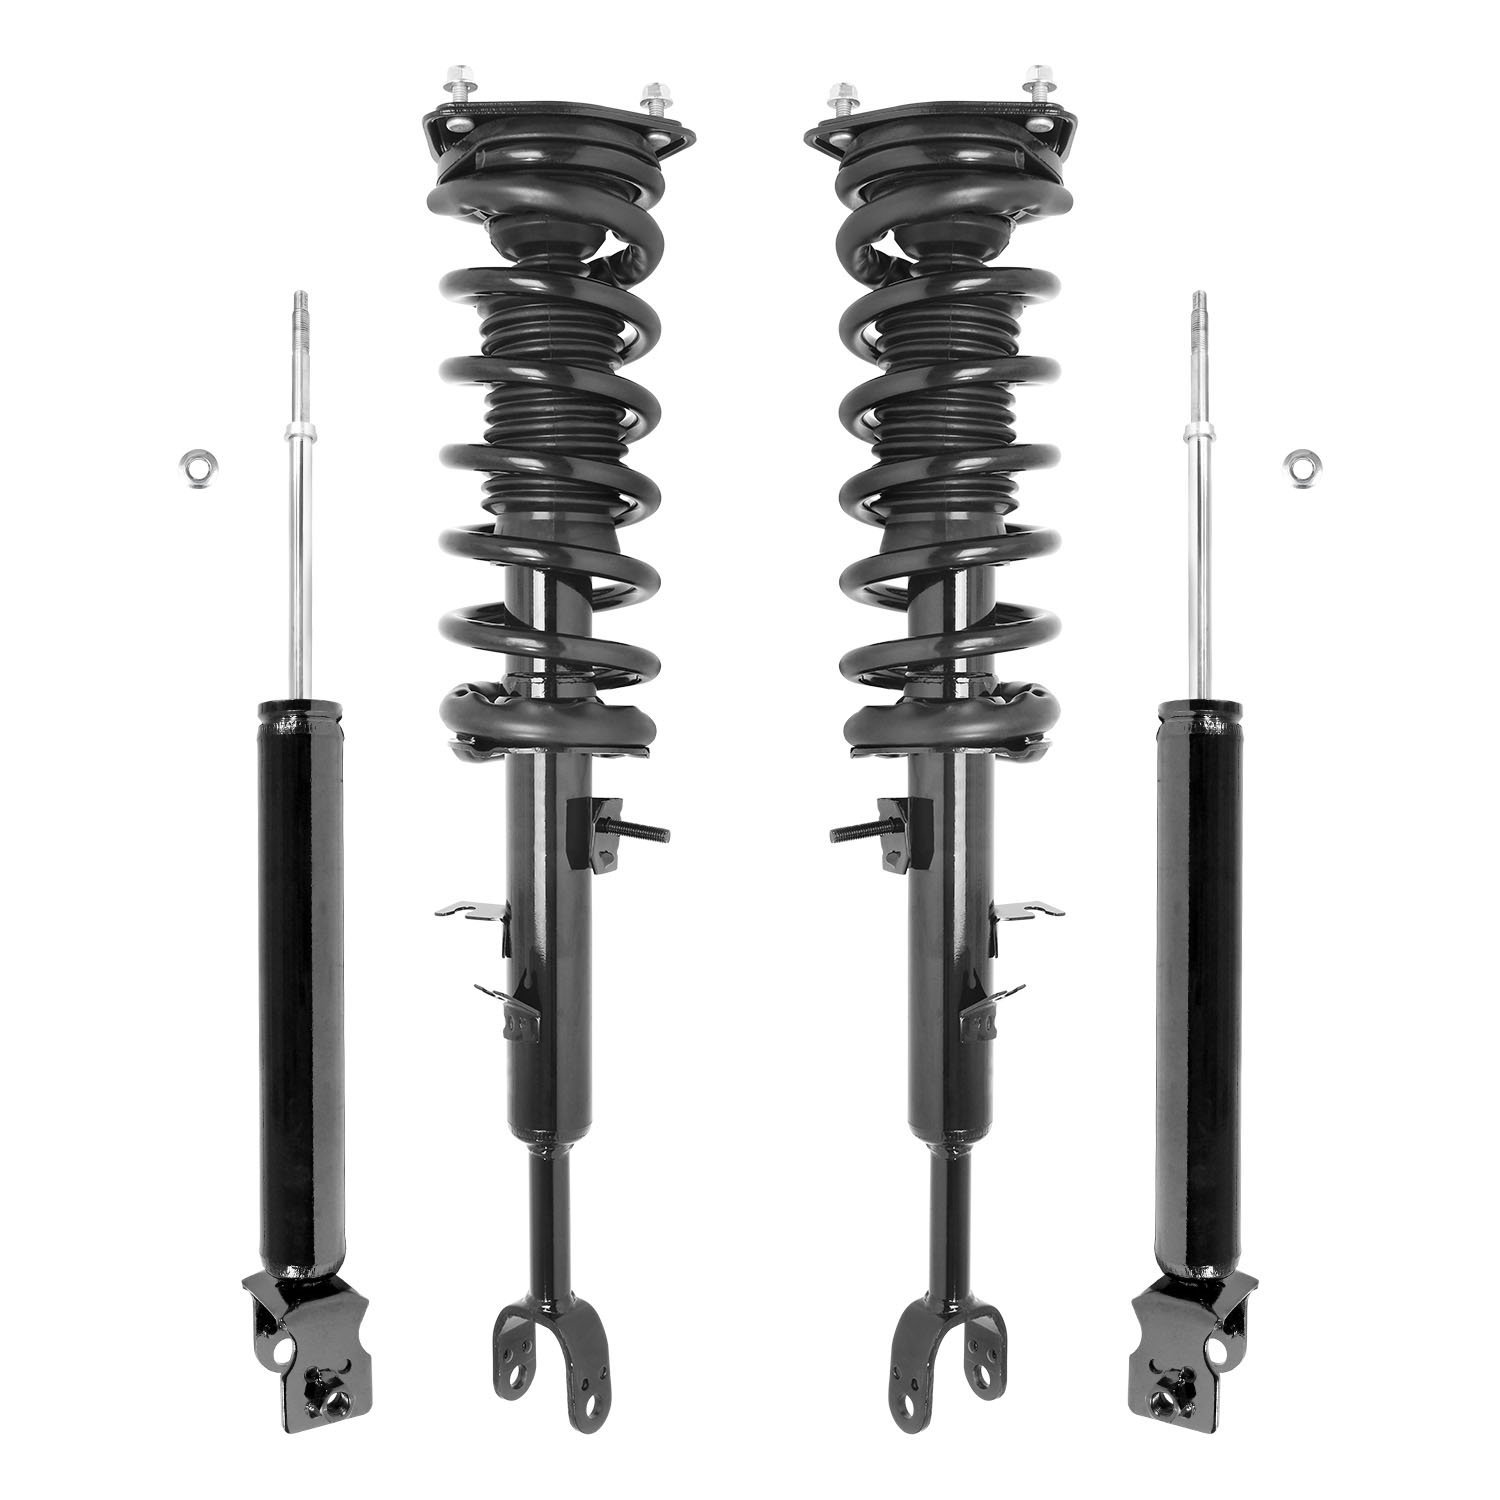 4-11397-255210-001 Front & Rear Suspension Strut & Coil Spring Assembly Fits Select Infiniti G35